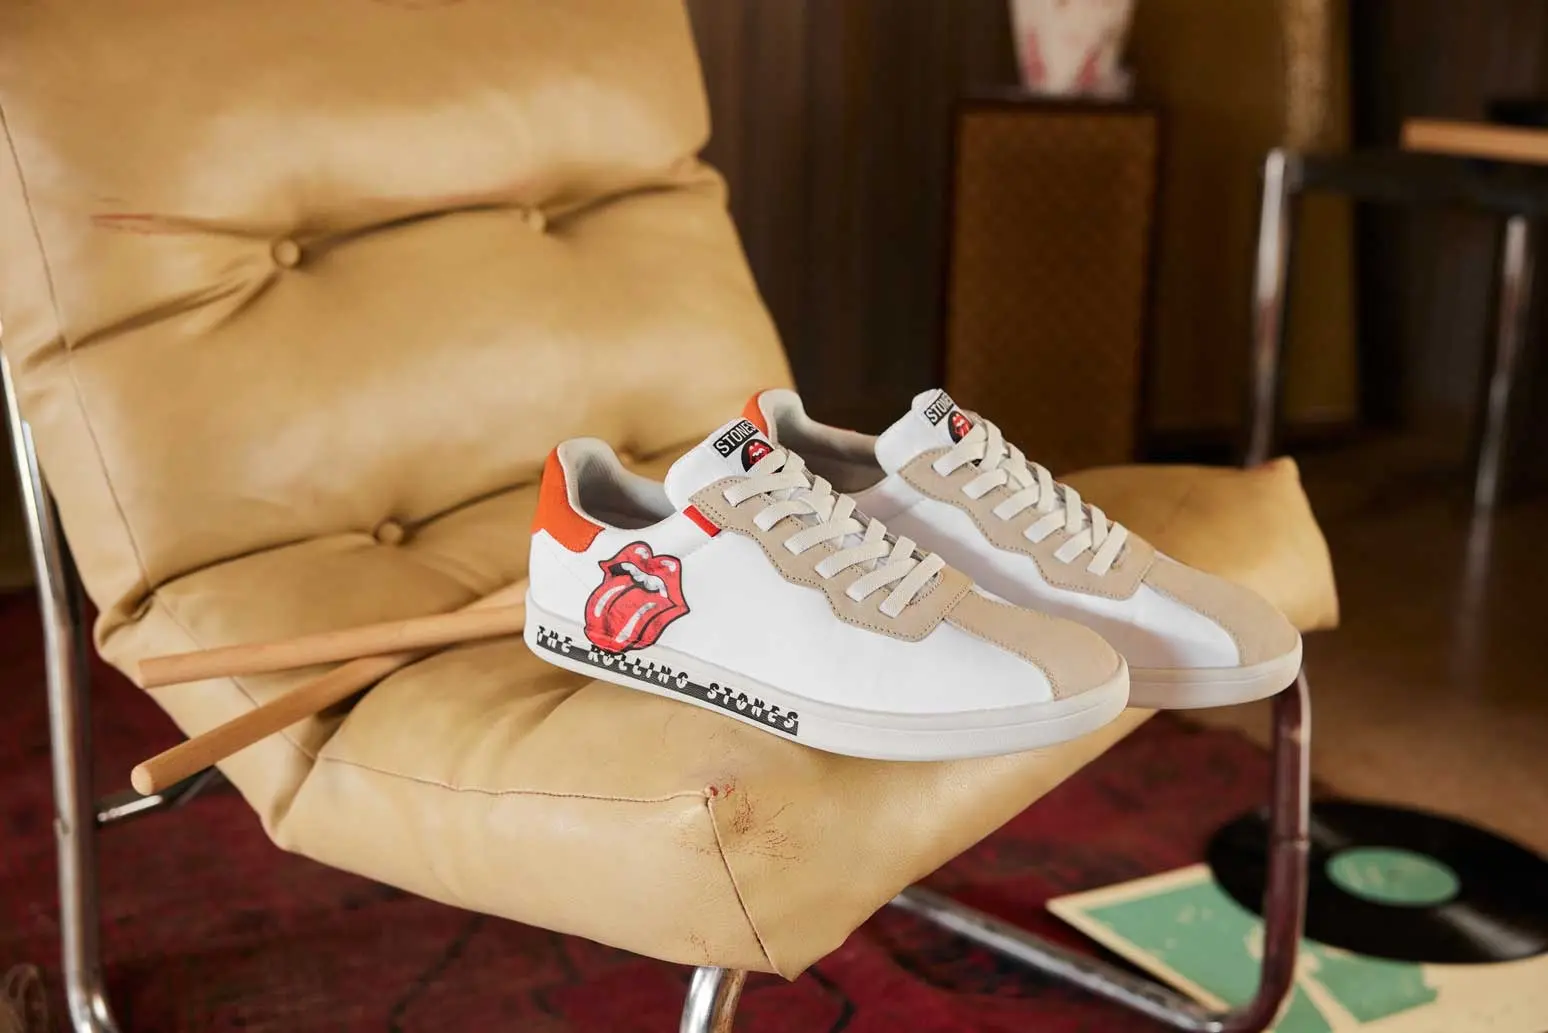 Skechers x The Rolling Stone